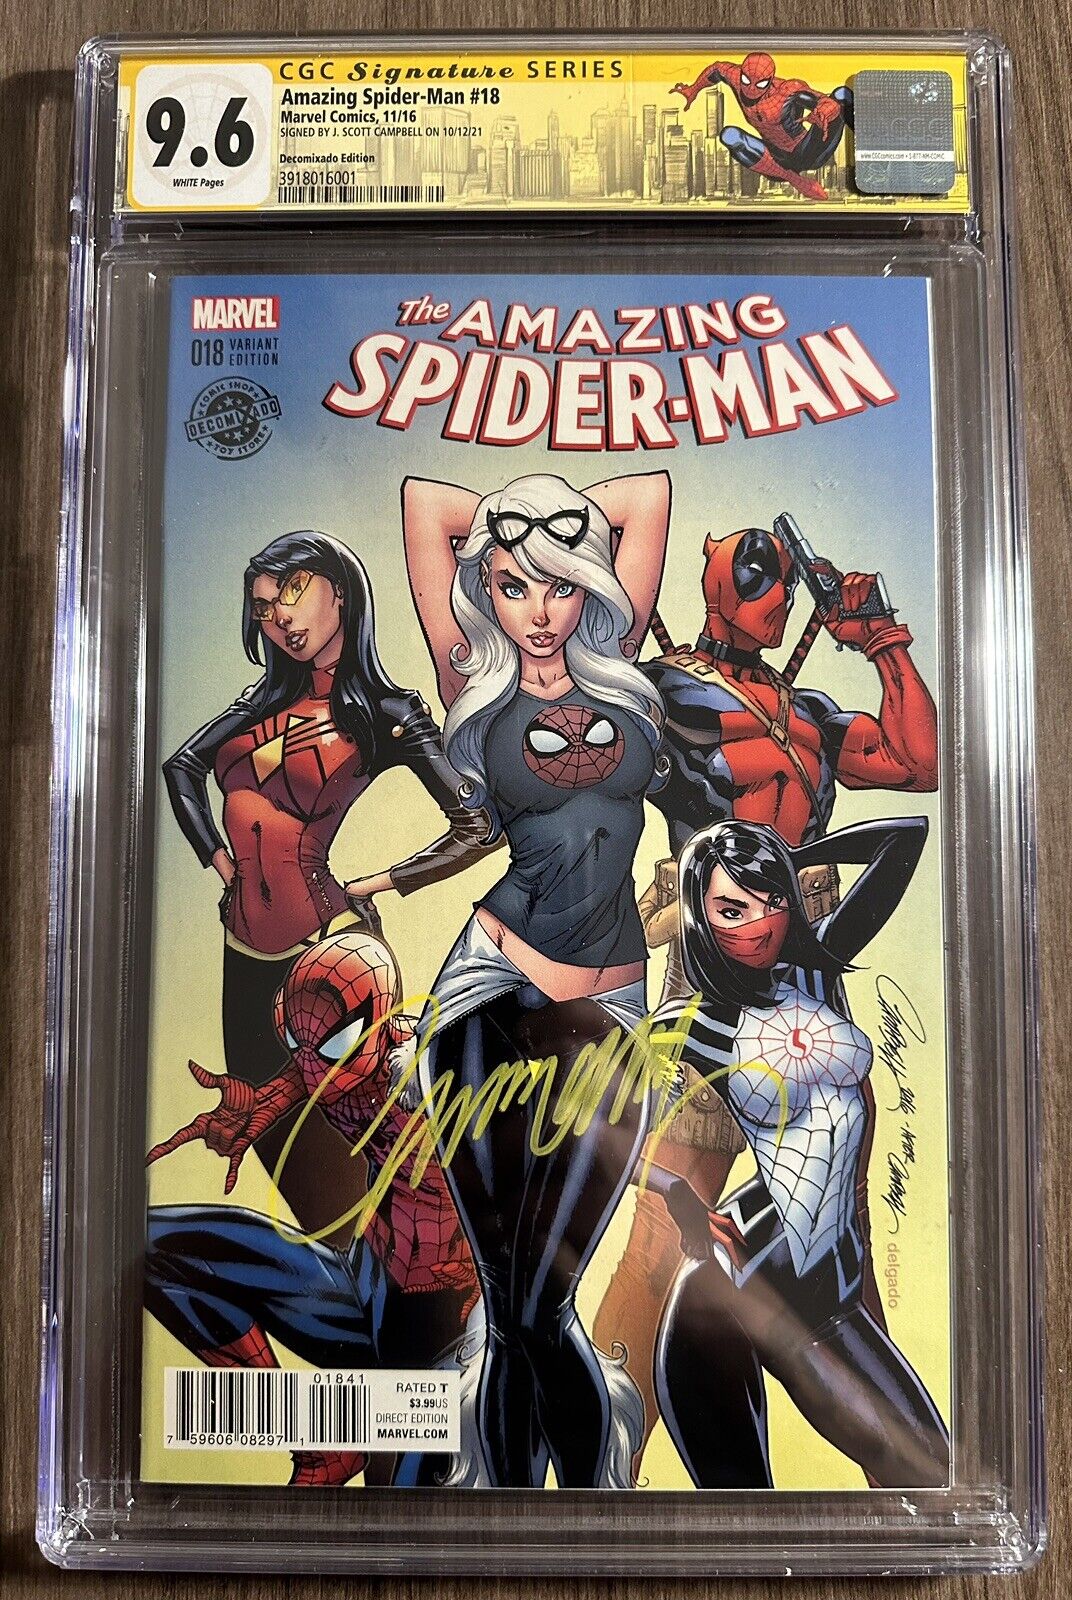 AMAZING SPIDER-MAN V3 #18 DECOMIXADO CGC 9.6 SS SIGNED BY CAMPBELL SKYLINE LABEL